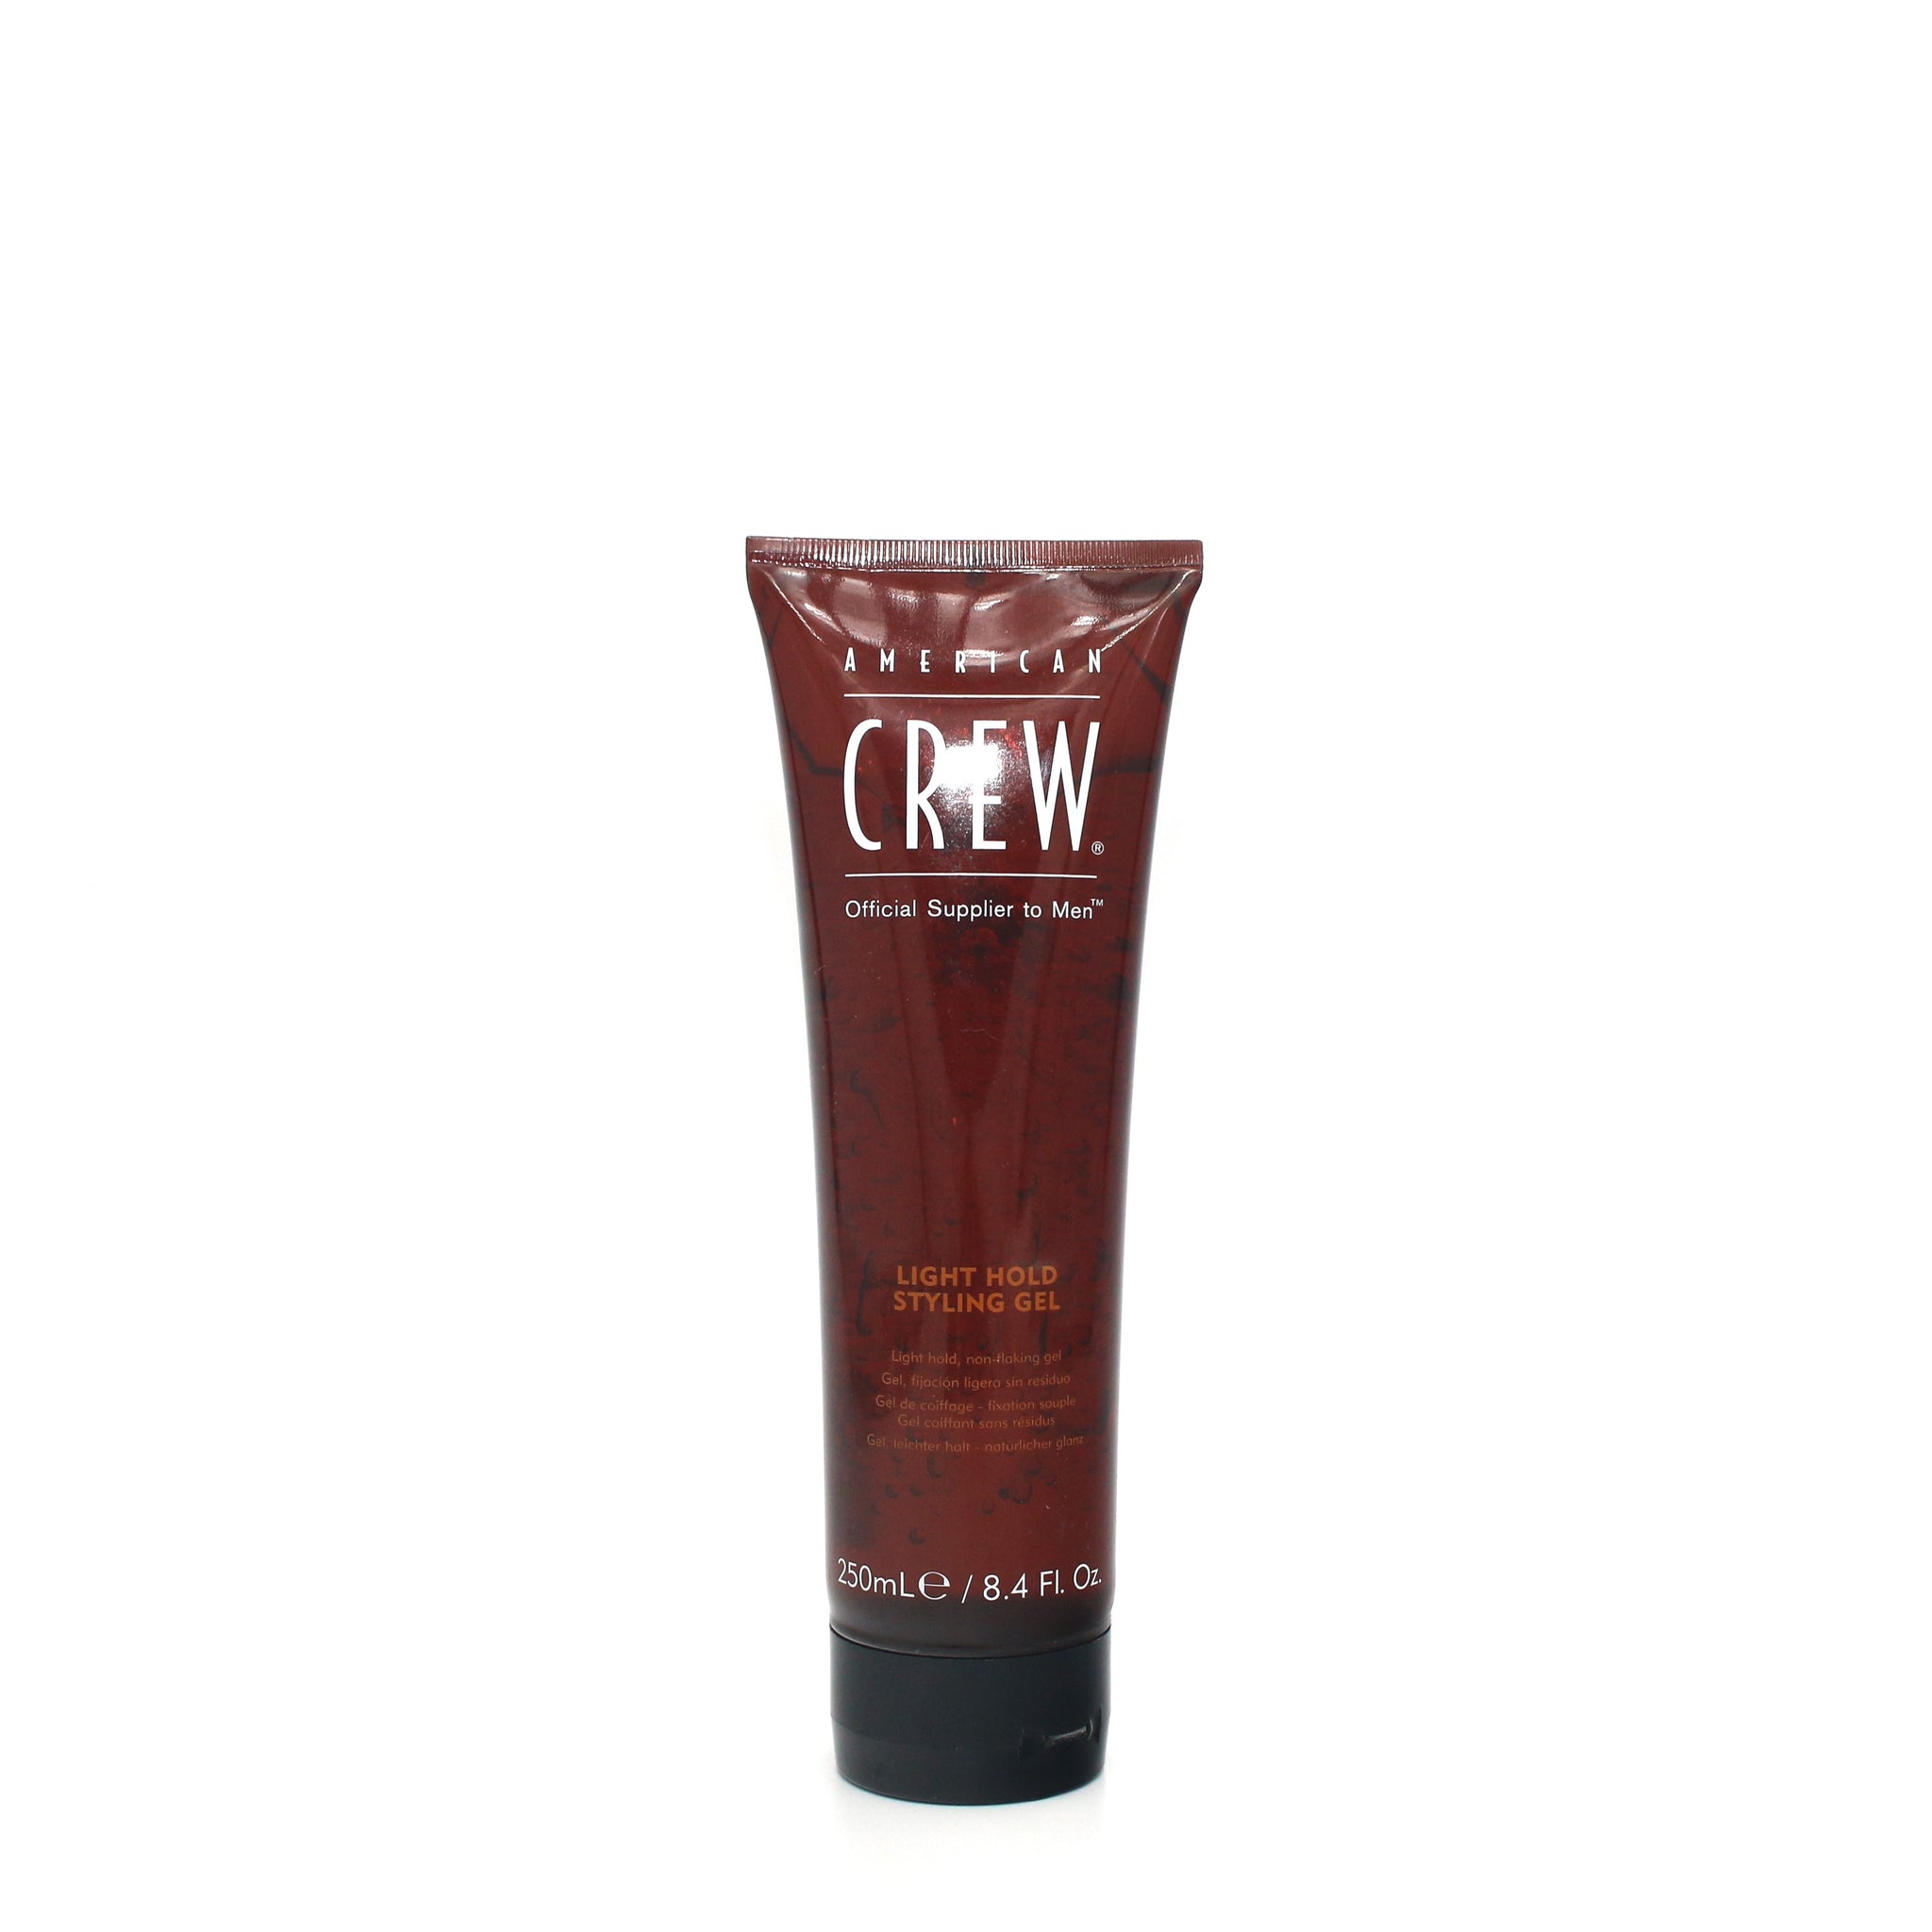 American Crew Official Supplier to Men Light Hold Styling Gel 8.4 oz